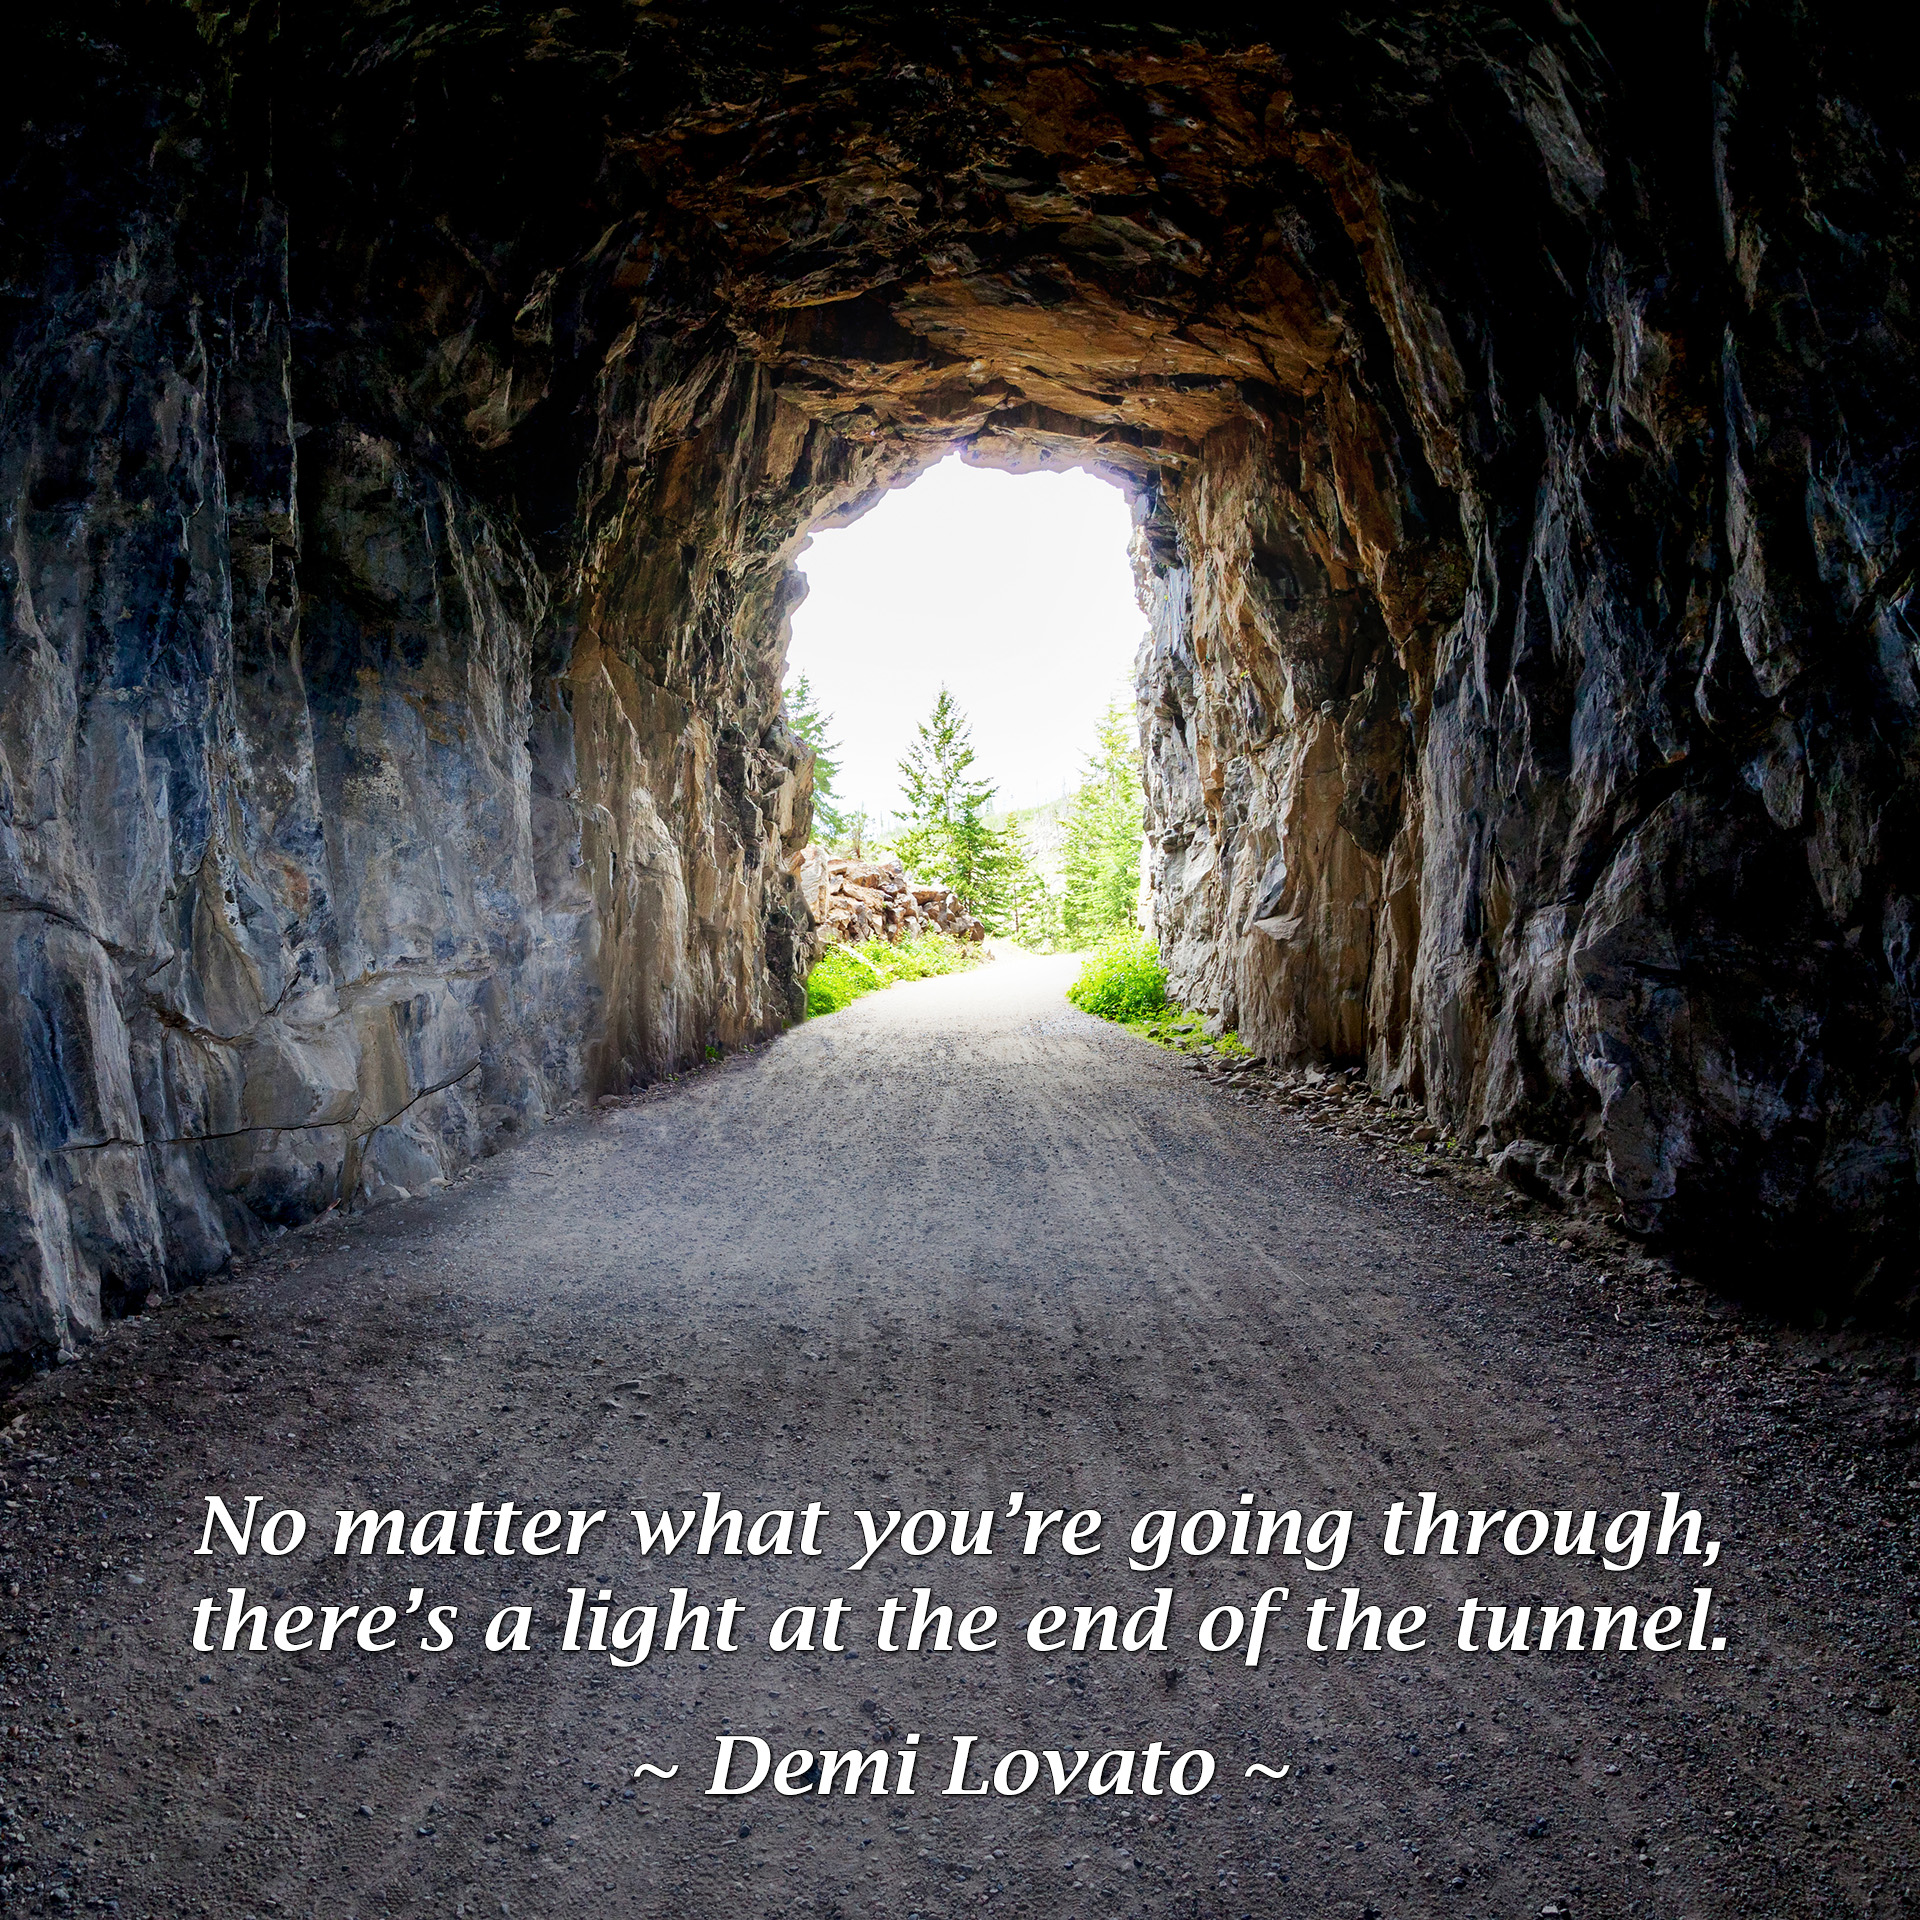 No matter what you’re going through, there’s a light at the end of the tunnel. - Demi Lovato